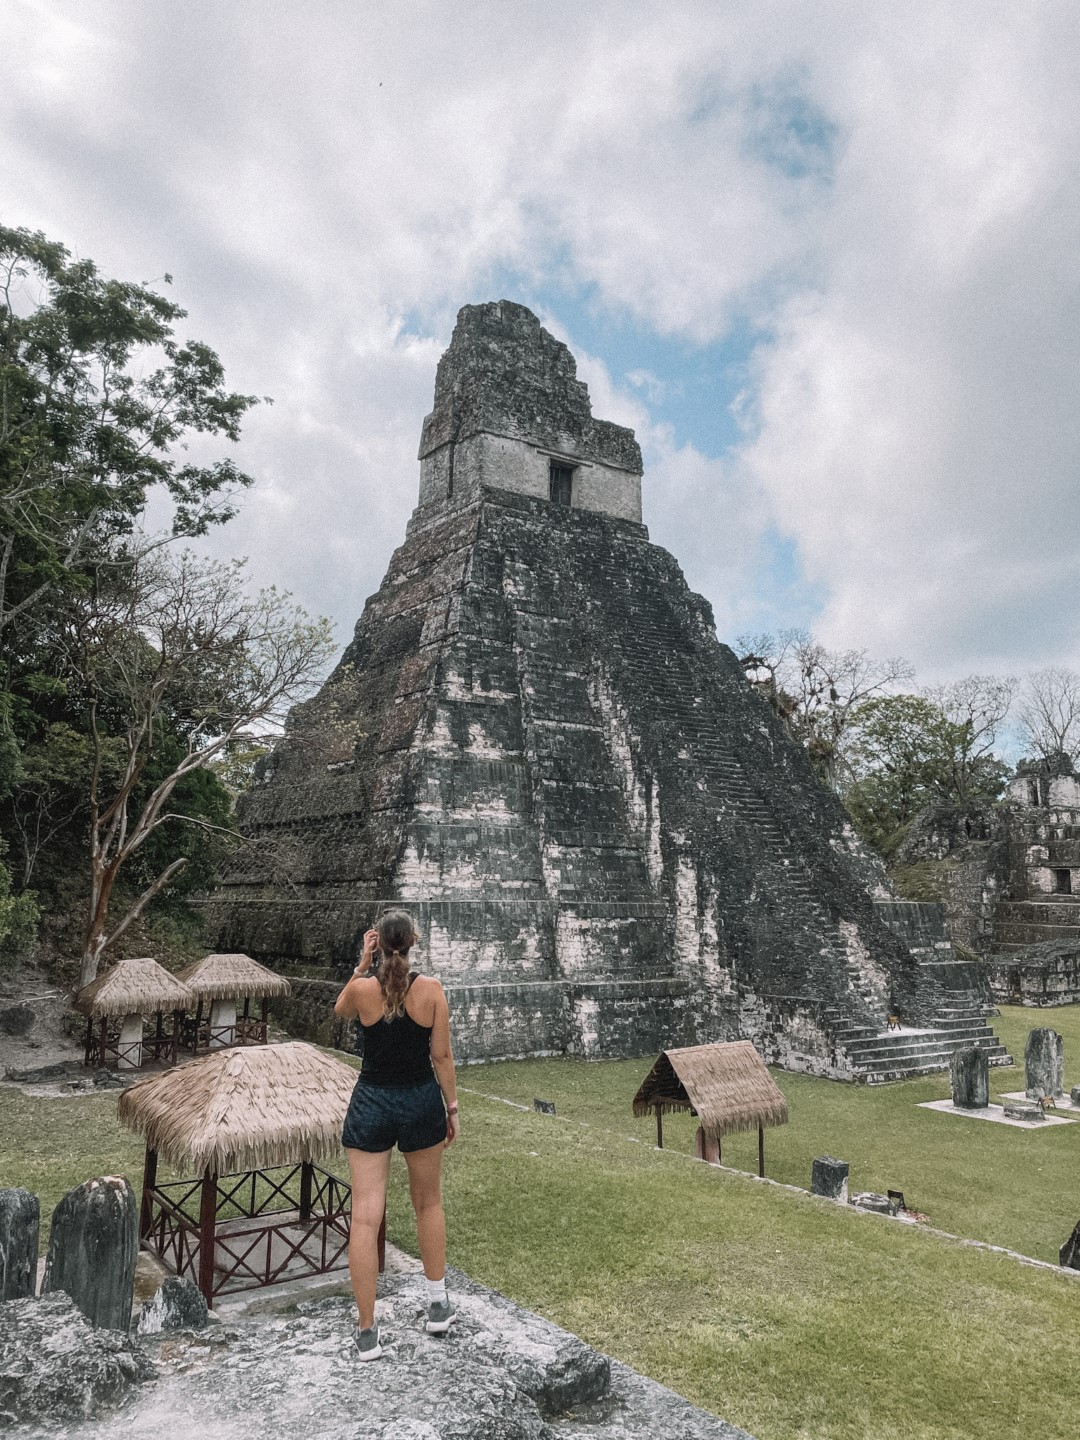 Image of a woman standing in front of the most famous pyramid in Tikal, Guatemala, inserted in a post about the best Tikal tours.